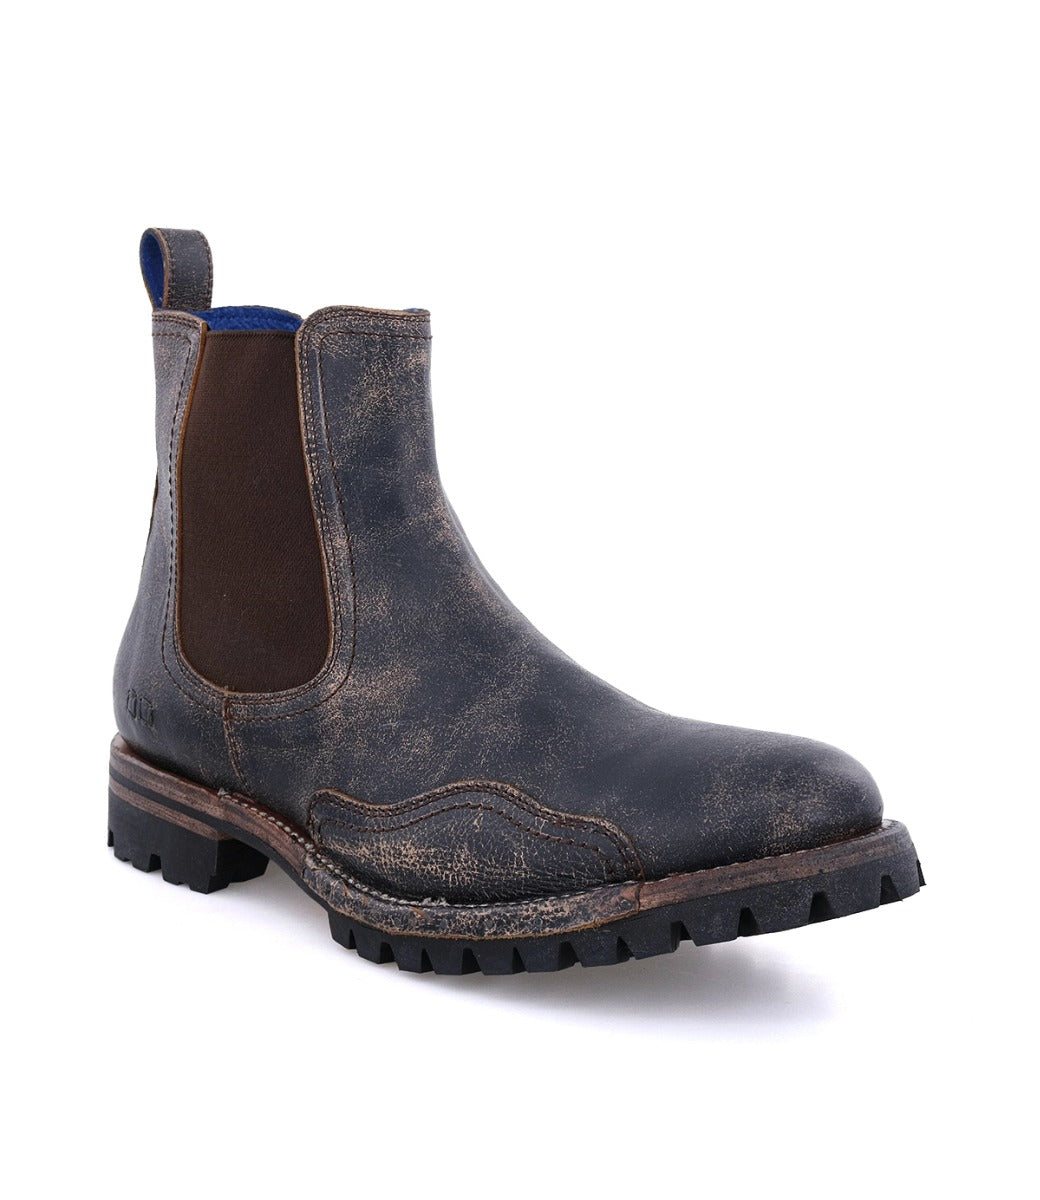 A single distressed leather Bed Stu Brady Trek Black Lux Boot with elastic side panels and a Vibram outsole, isolated on a white background.